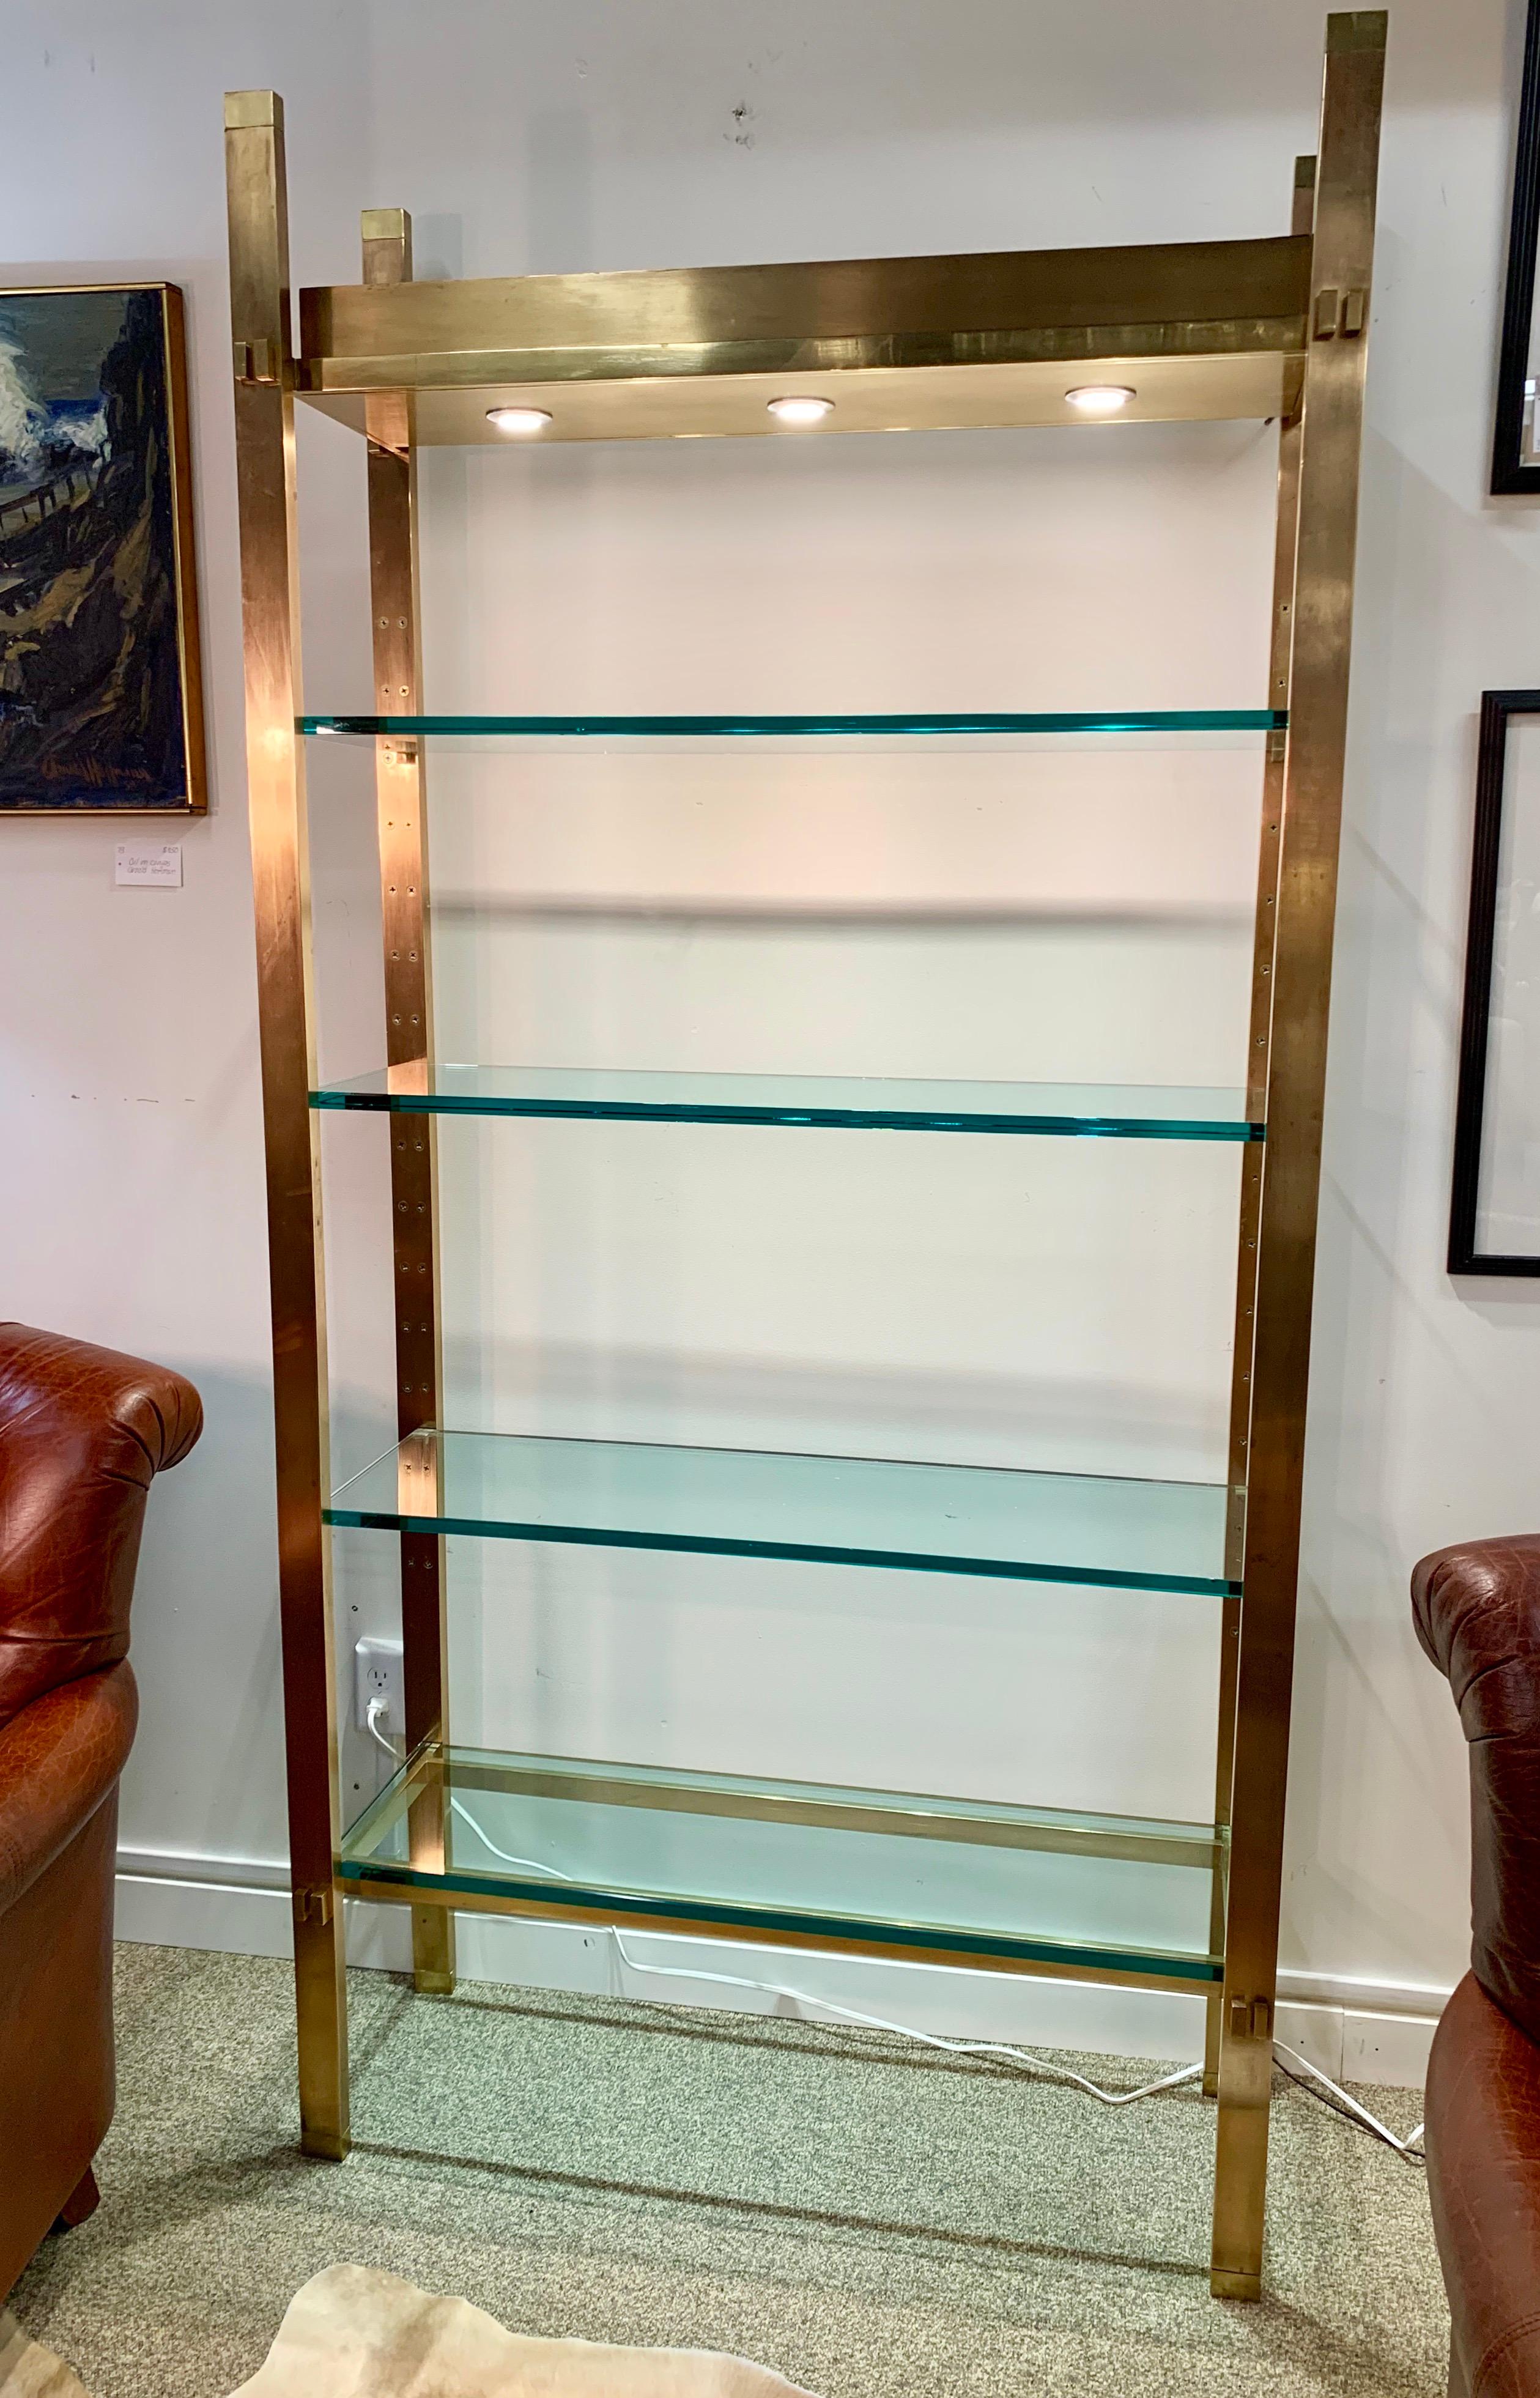 Paul M. Jones designed polished bronze and glass four tiered illuminated étagère or display shelf with 3/4” thick glass shelves.